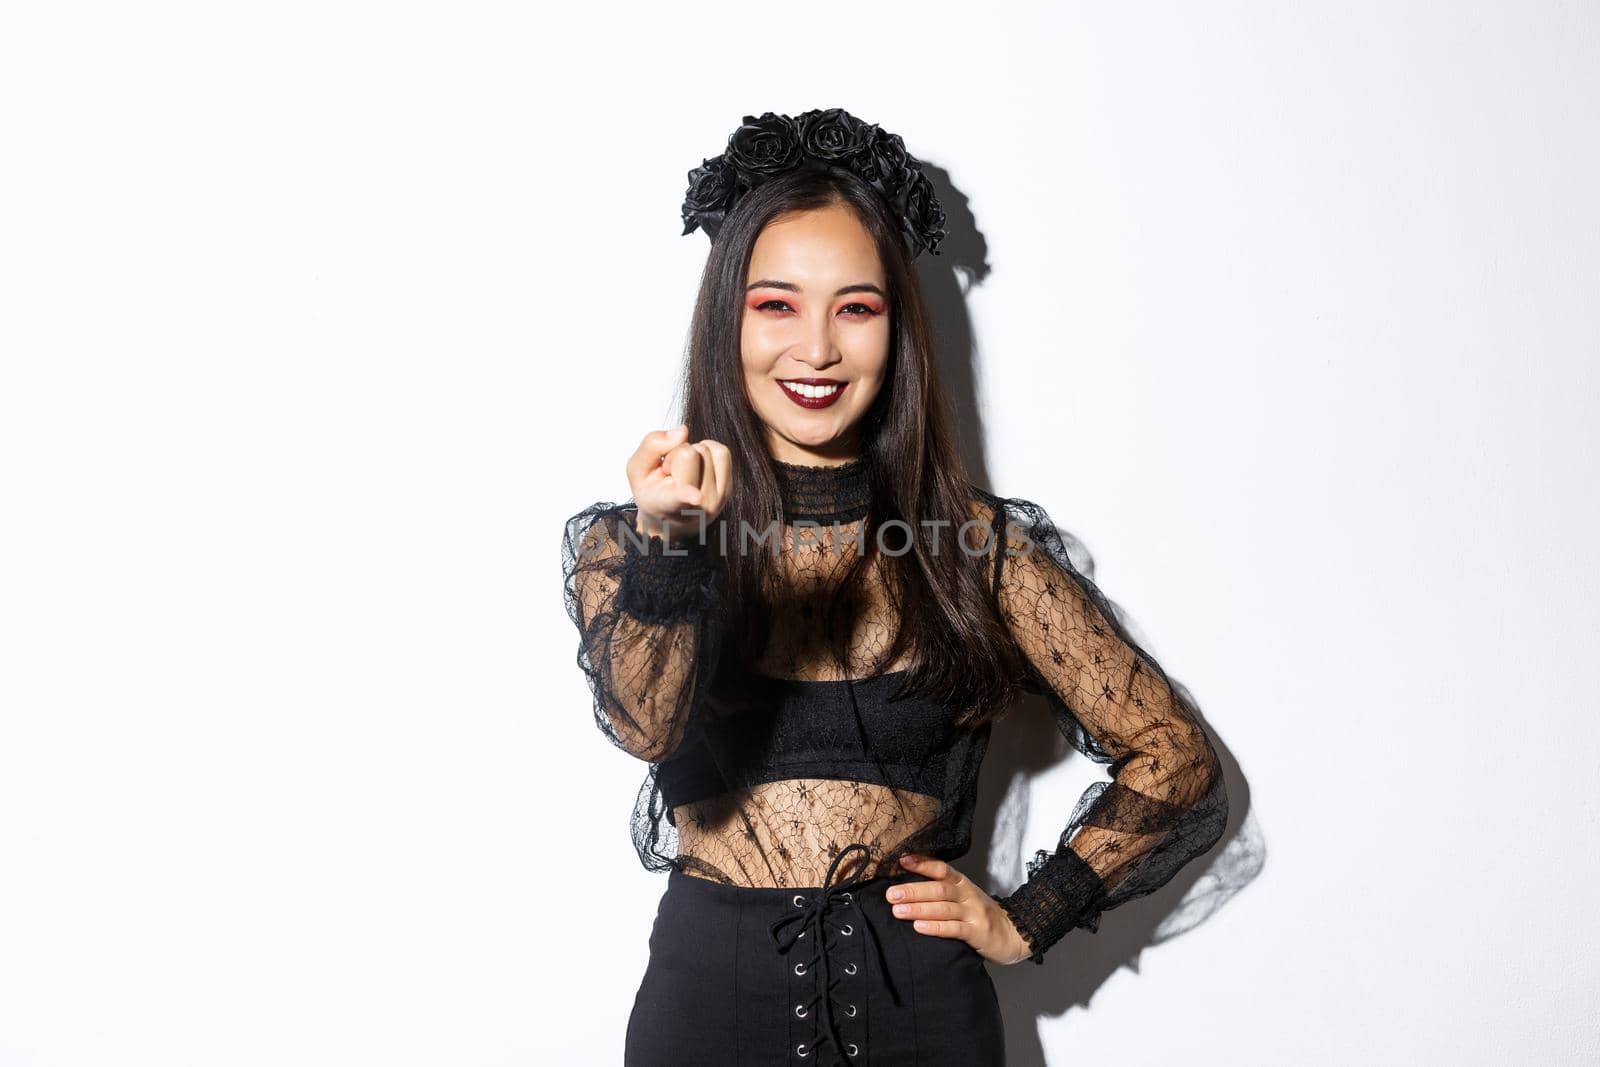 Beautiful woman in witch costume telling to come closer, flick finger and smiling, standing in halloween outfit, gothic makeup, standing over white background.